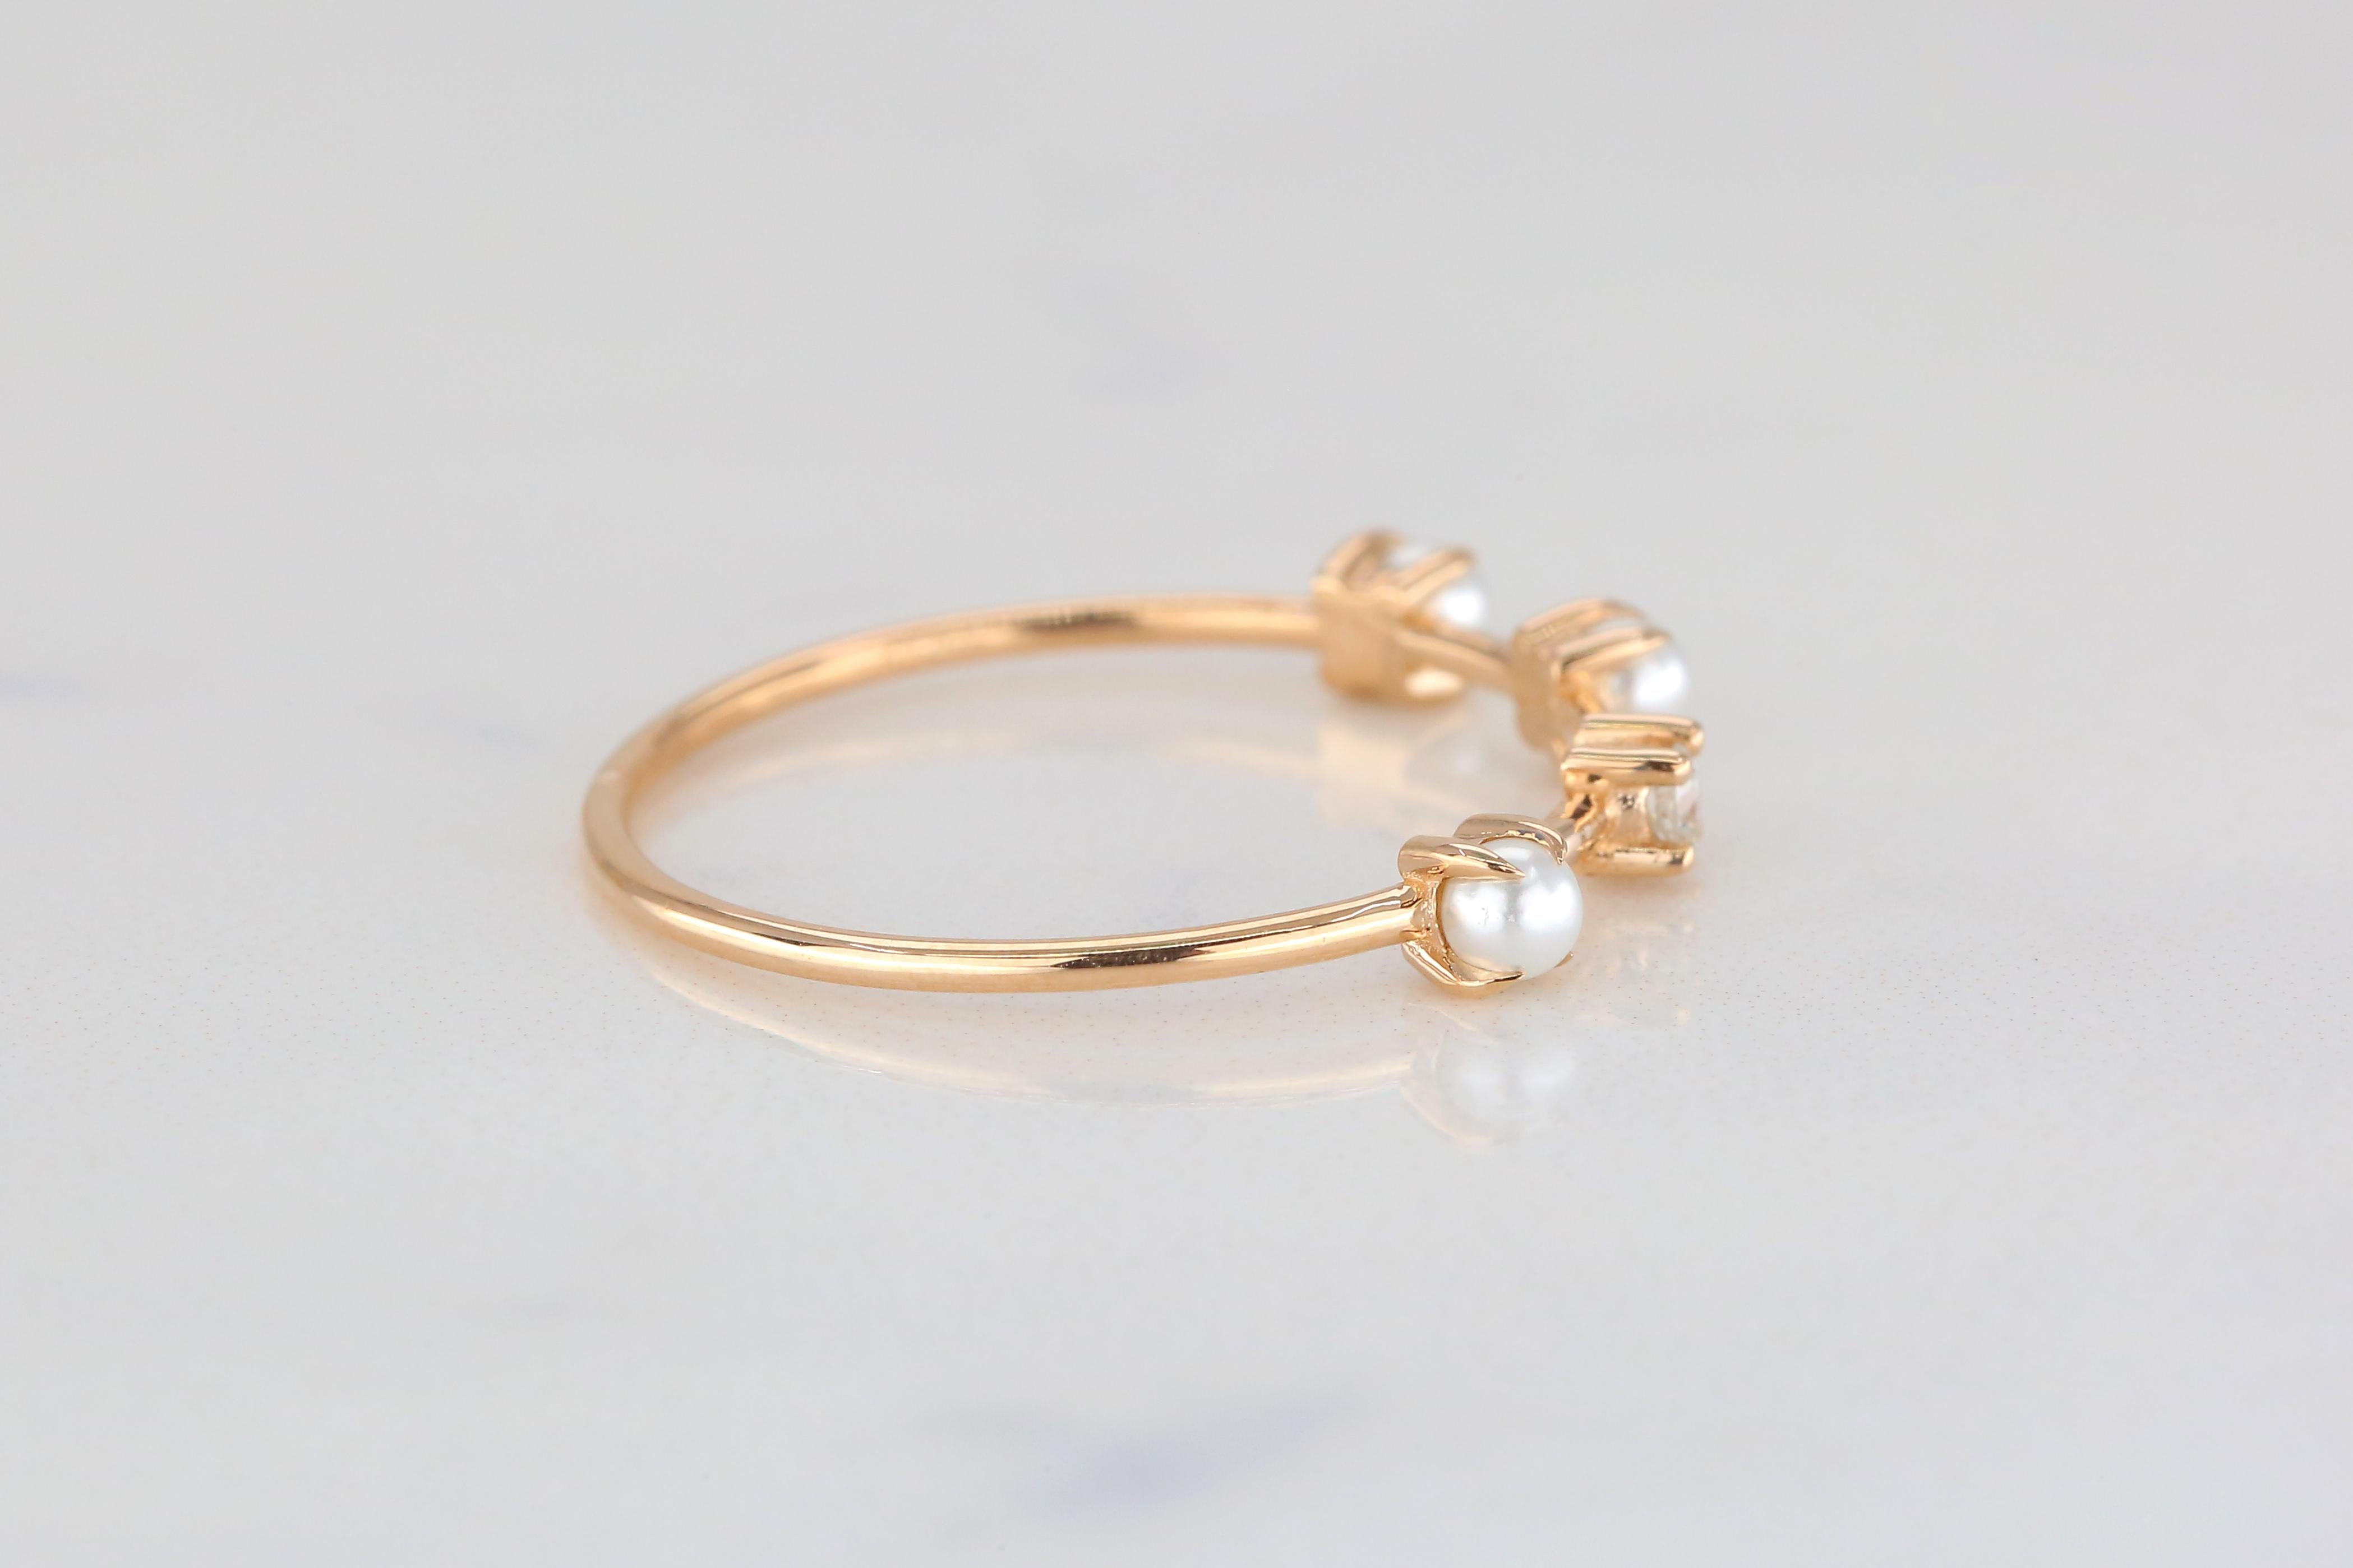 For Sale:  Three Pearl and Diamond Ring, 14K Gold Pearl Ring, Minimalist Style Ring 7